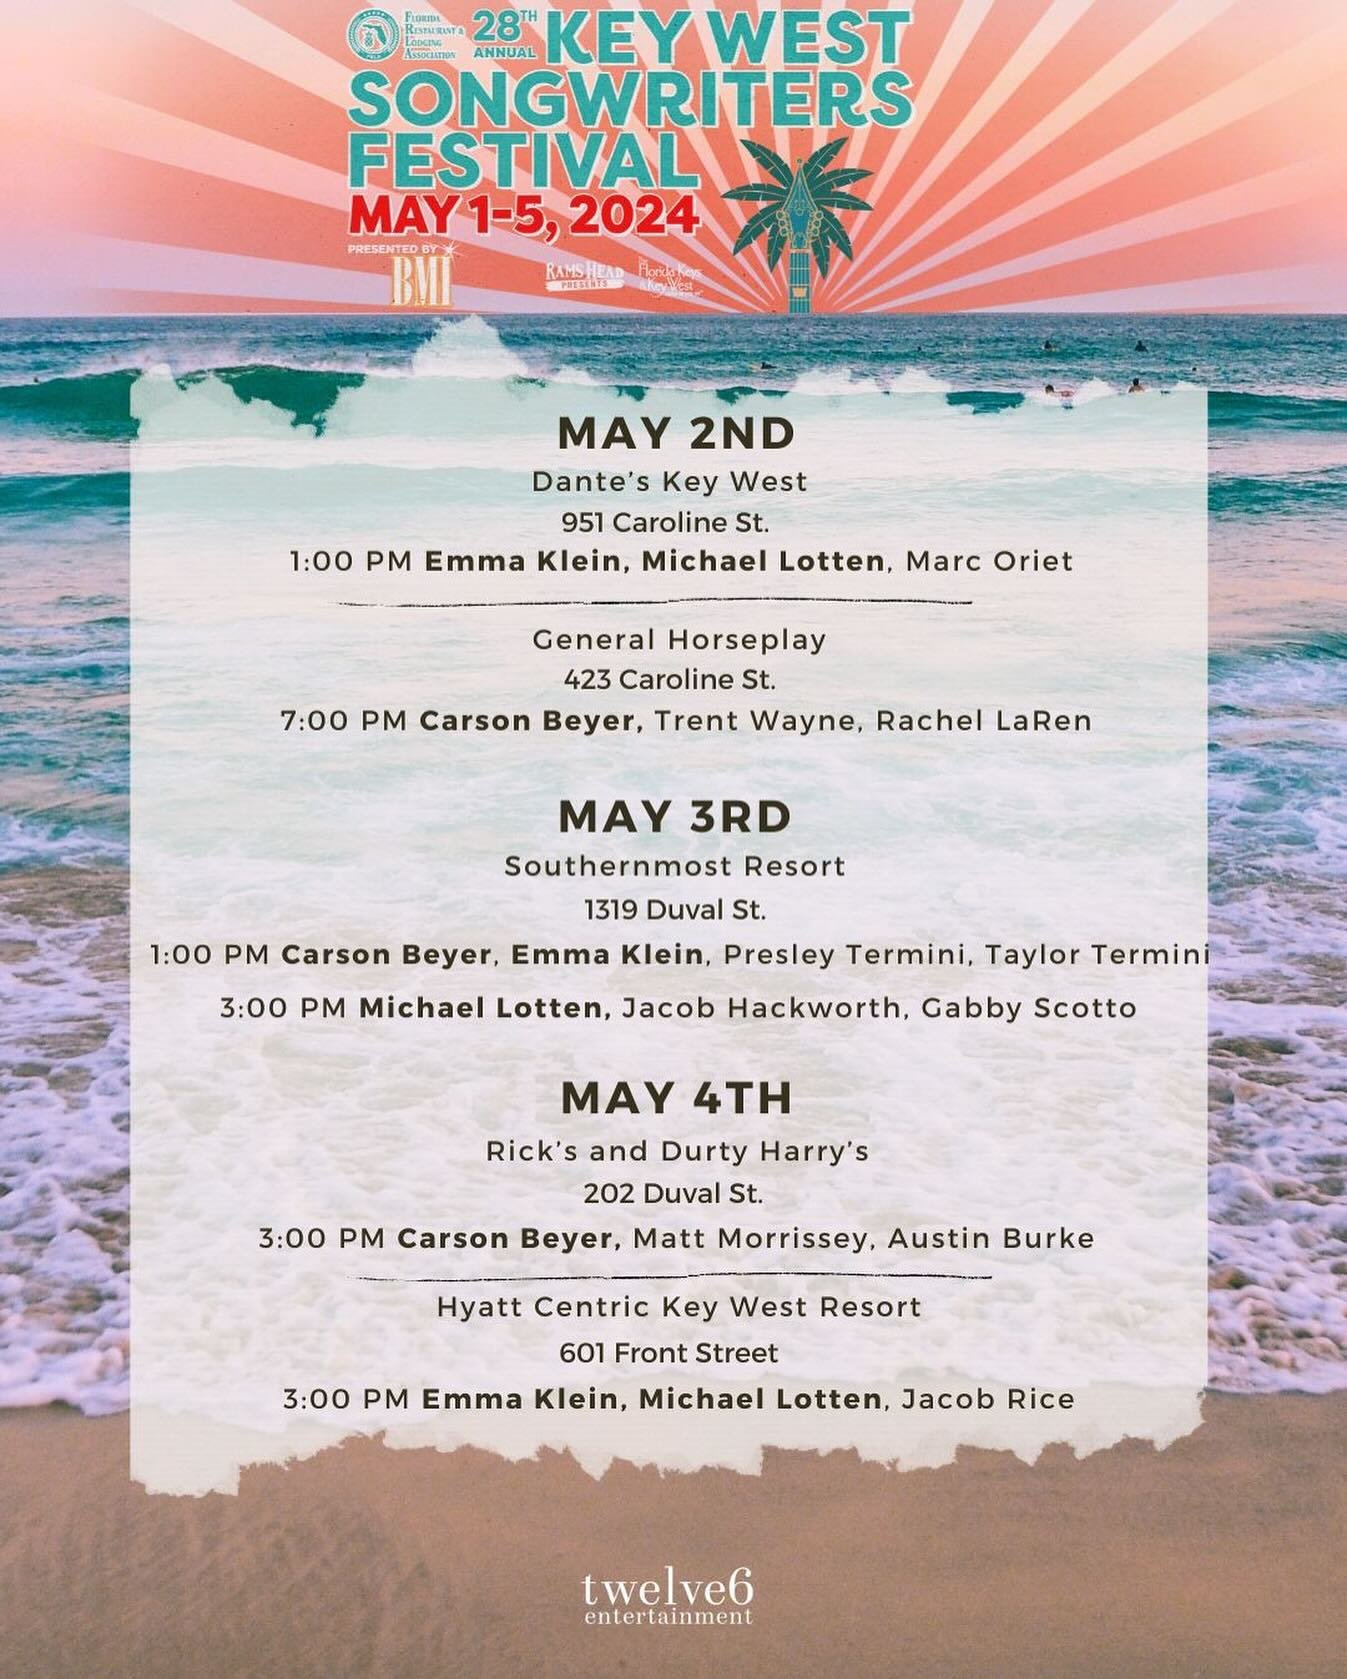 We are coming @keywestsongwritersfestival !! See you soon 🏝️🎤🍹👏🏼